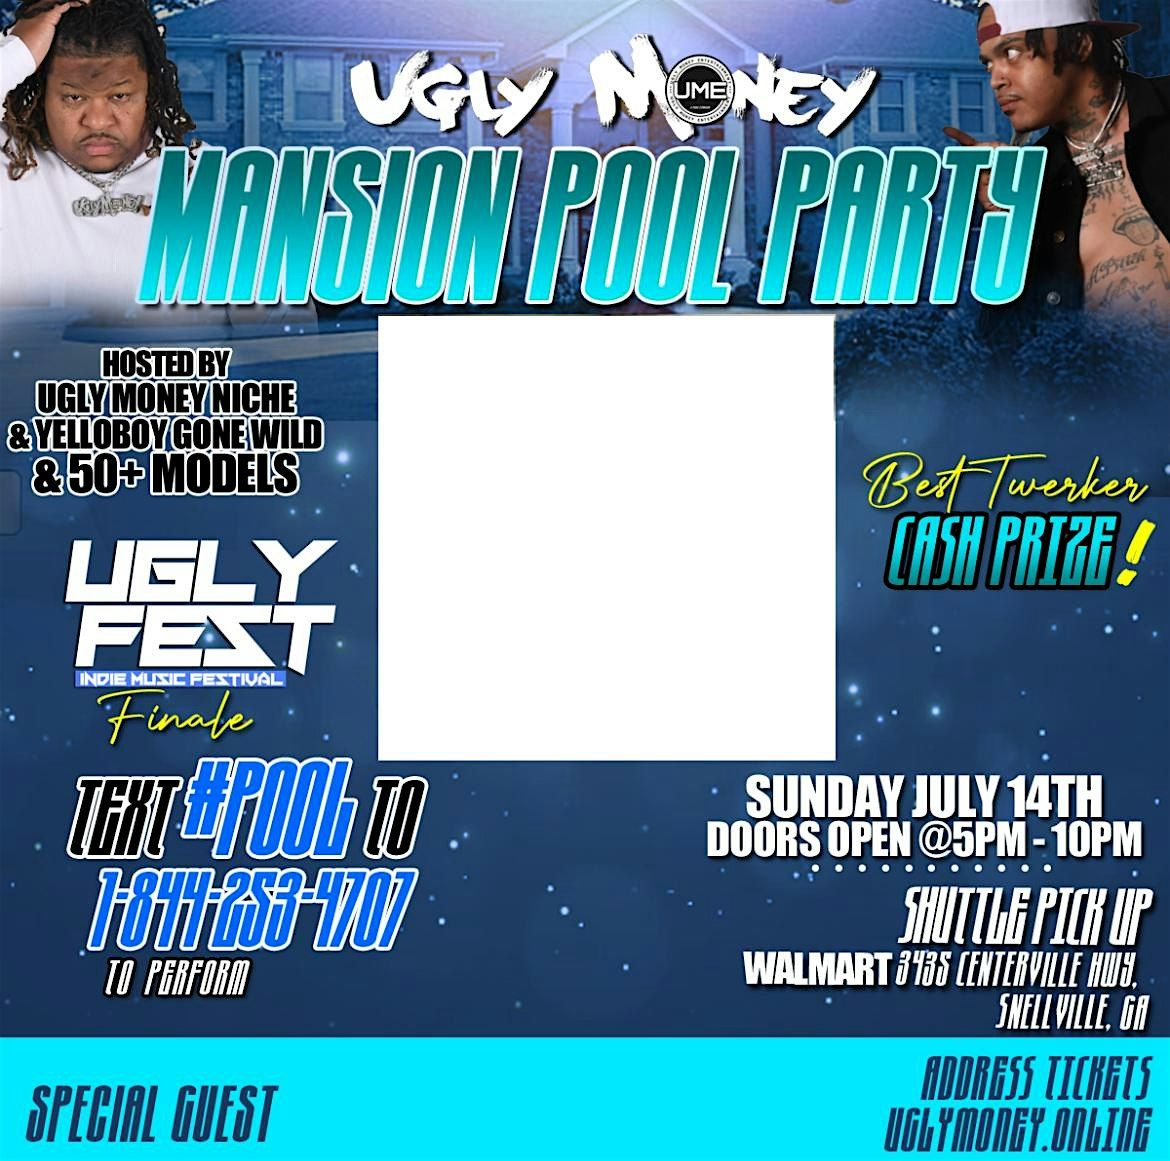 Ugly Money Mansion Pool Party